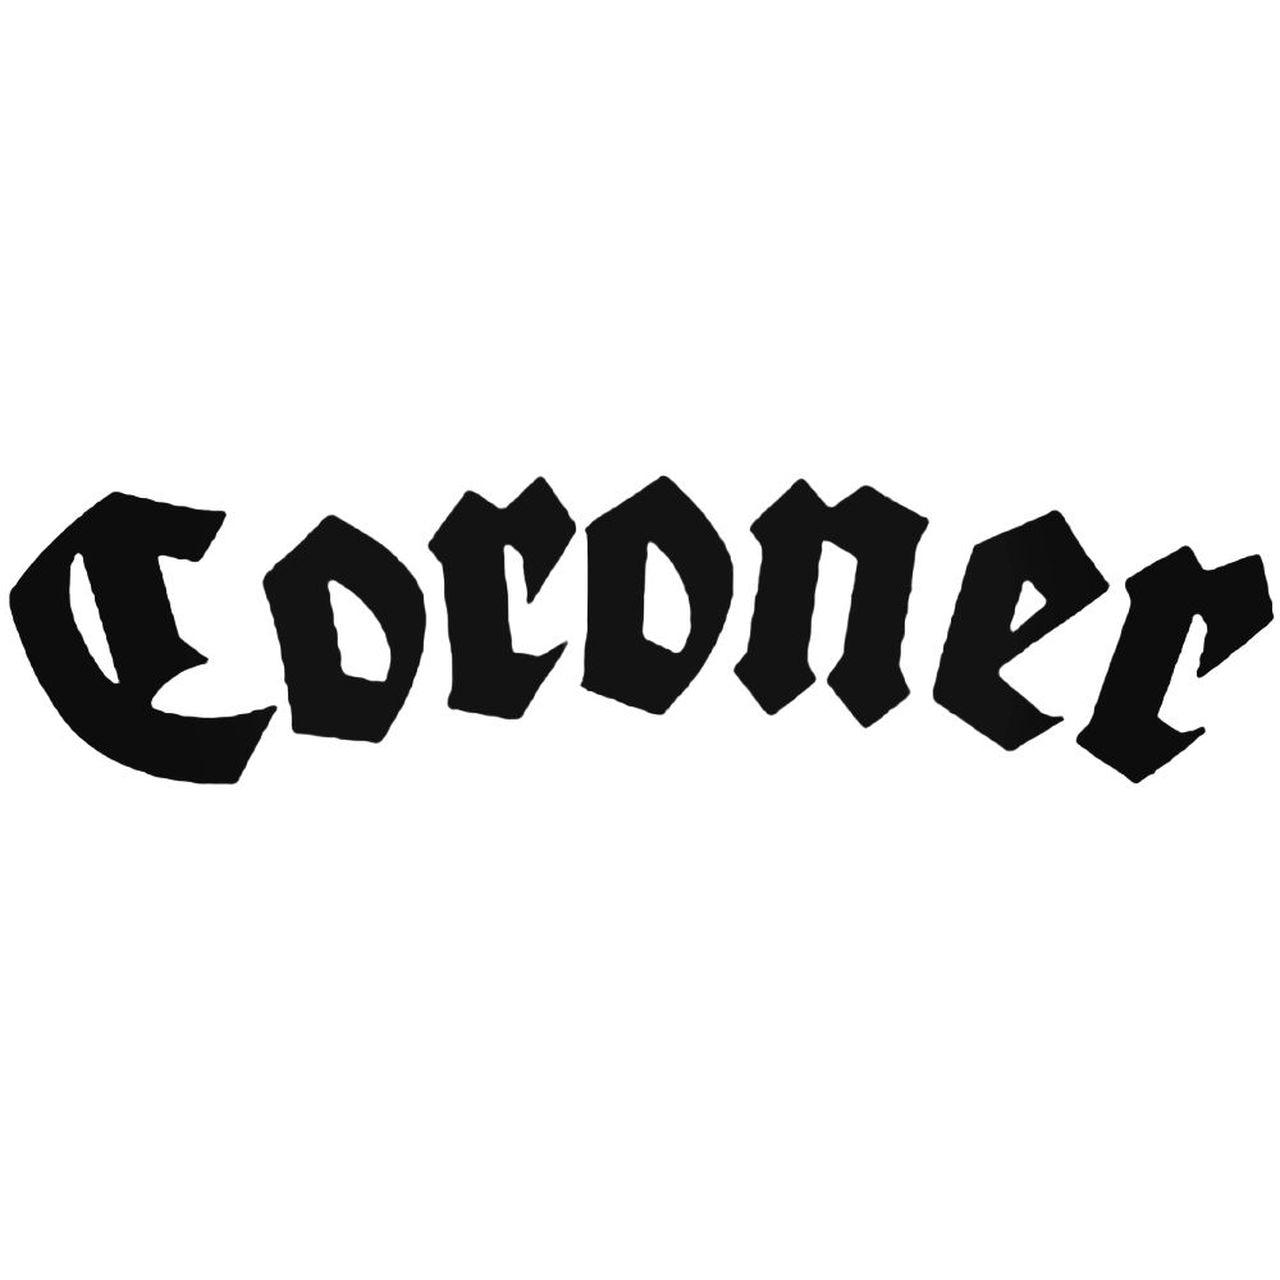 Coroner Logo - Coroner Logo Vinyl Band Logo Vinyl Decal